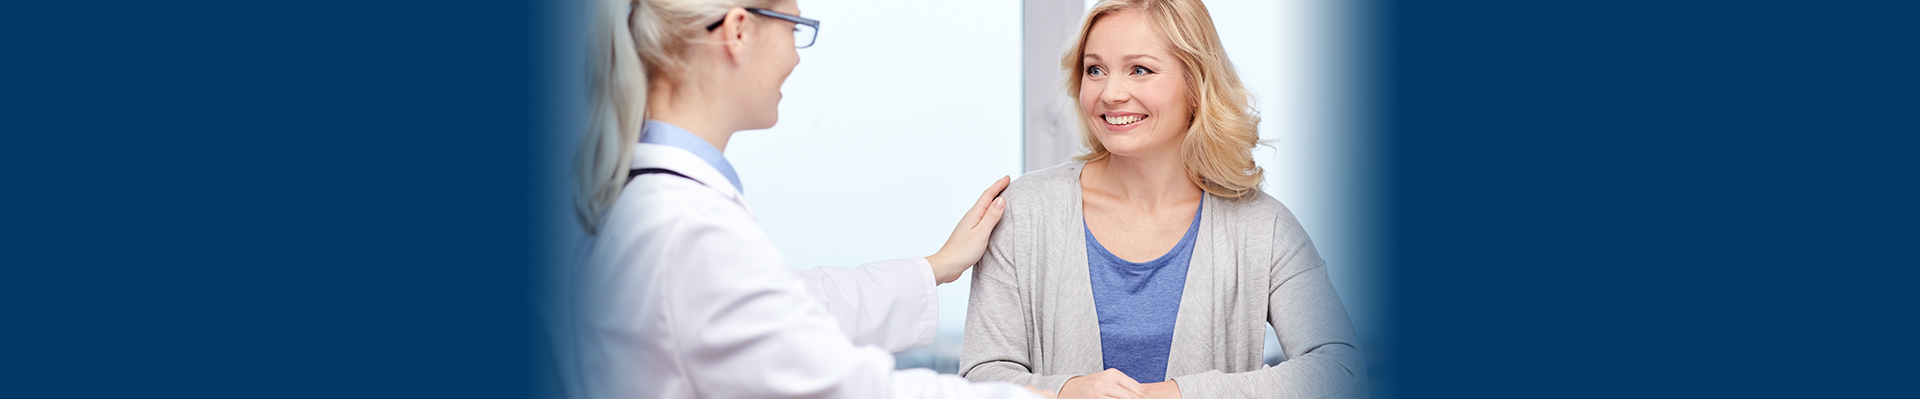 Banner picture of a female physician looking at a female patient. She has her hand on her shoulder and they are both smiling.